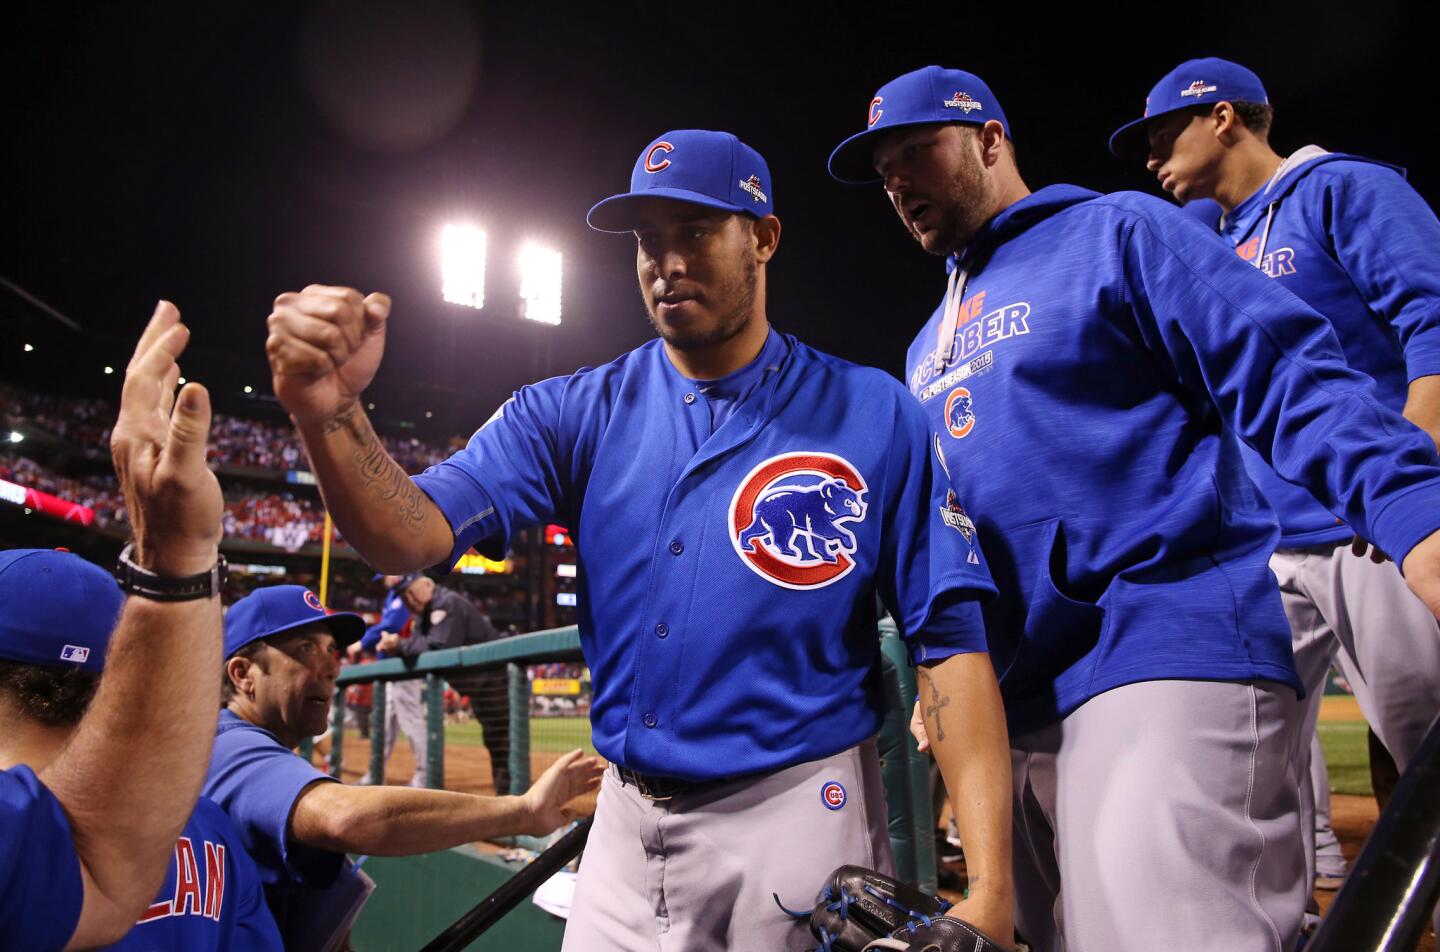 Cubs closer Hector Rondon (56) celebrates his save and the win in Game 2.